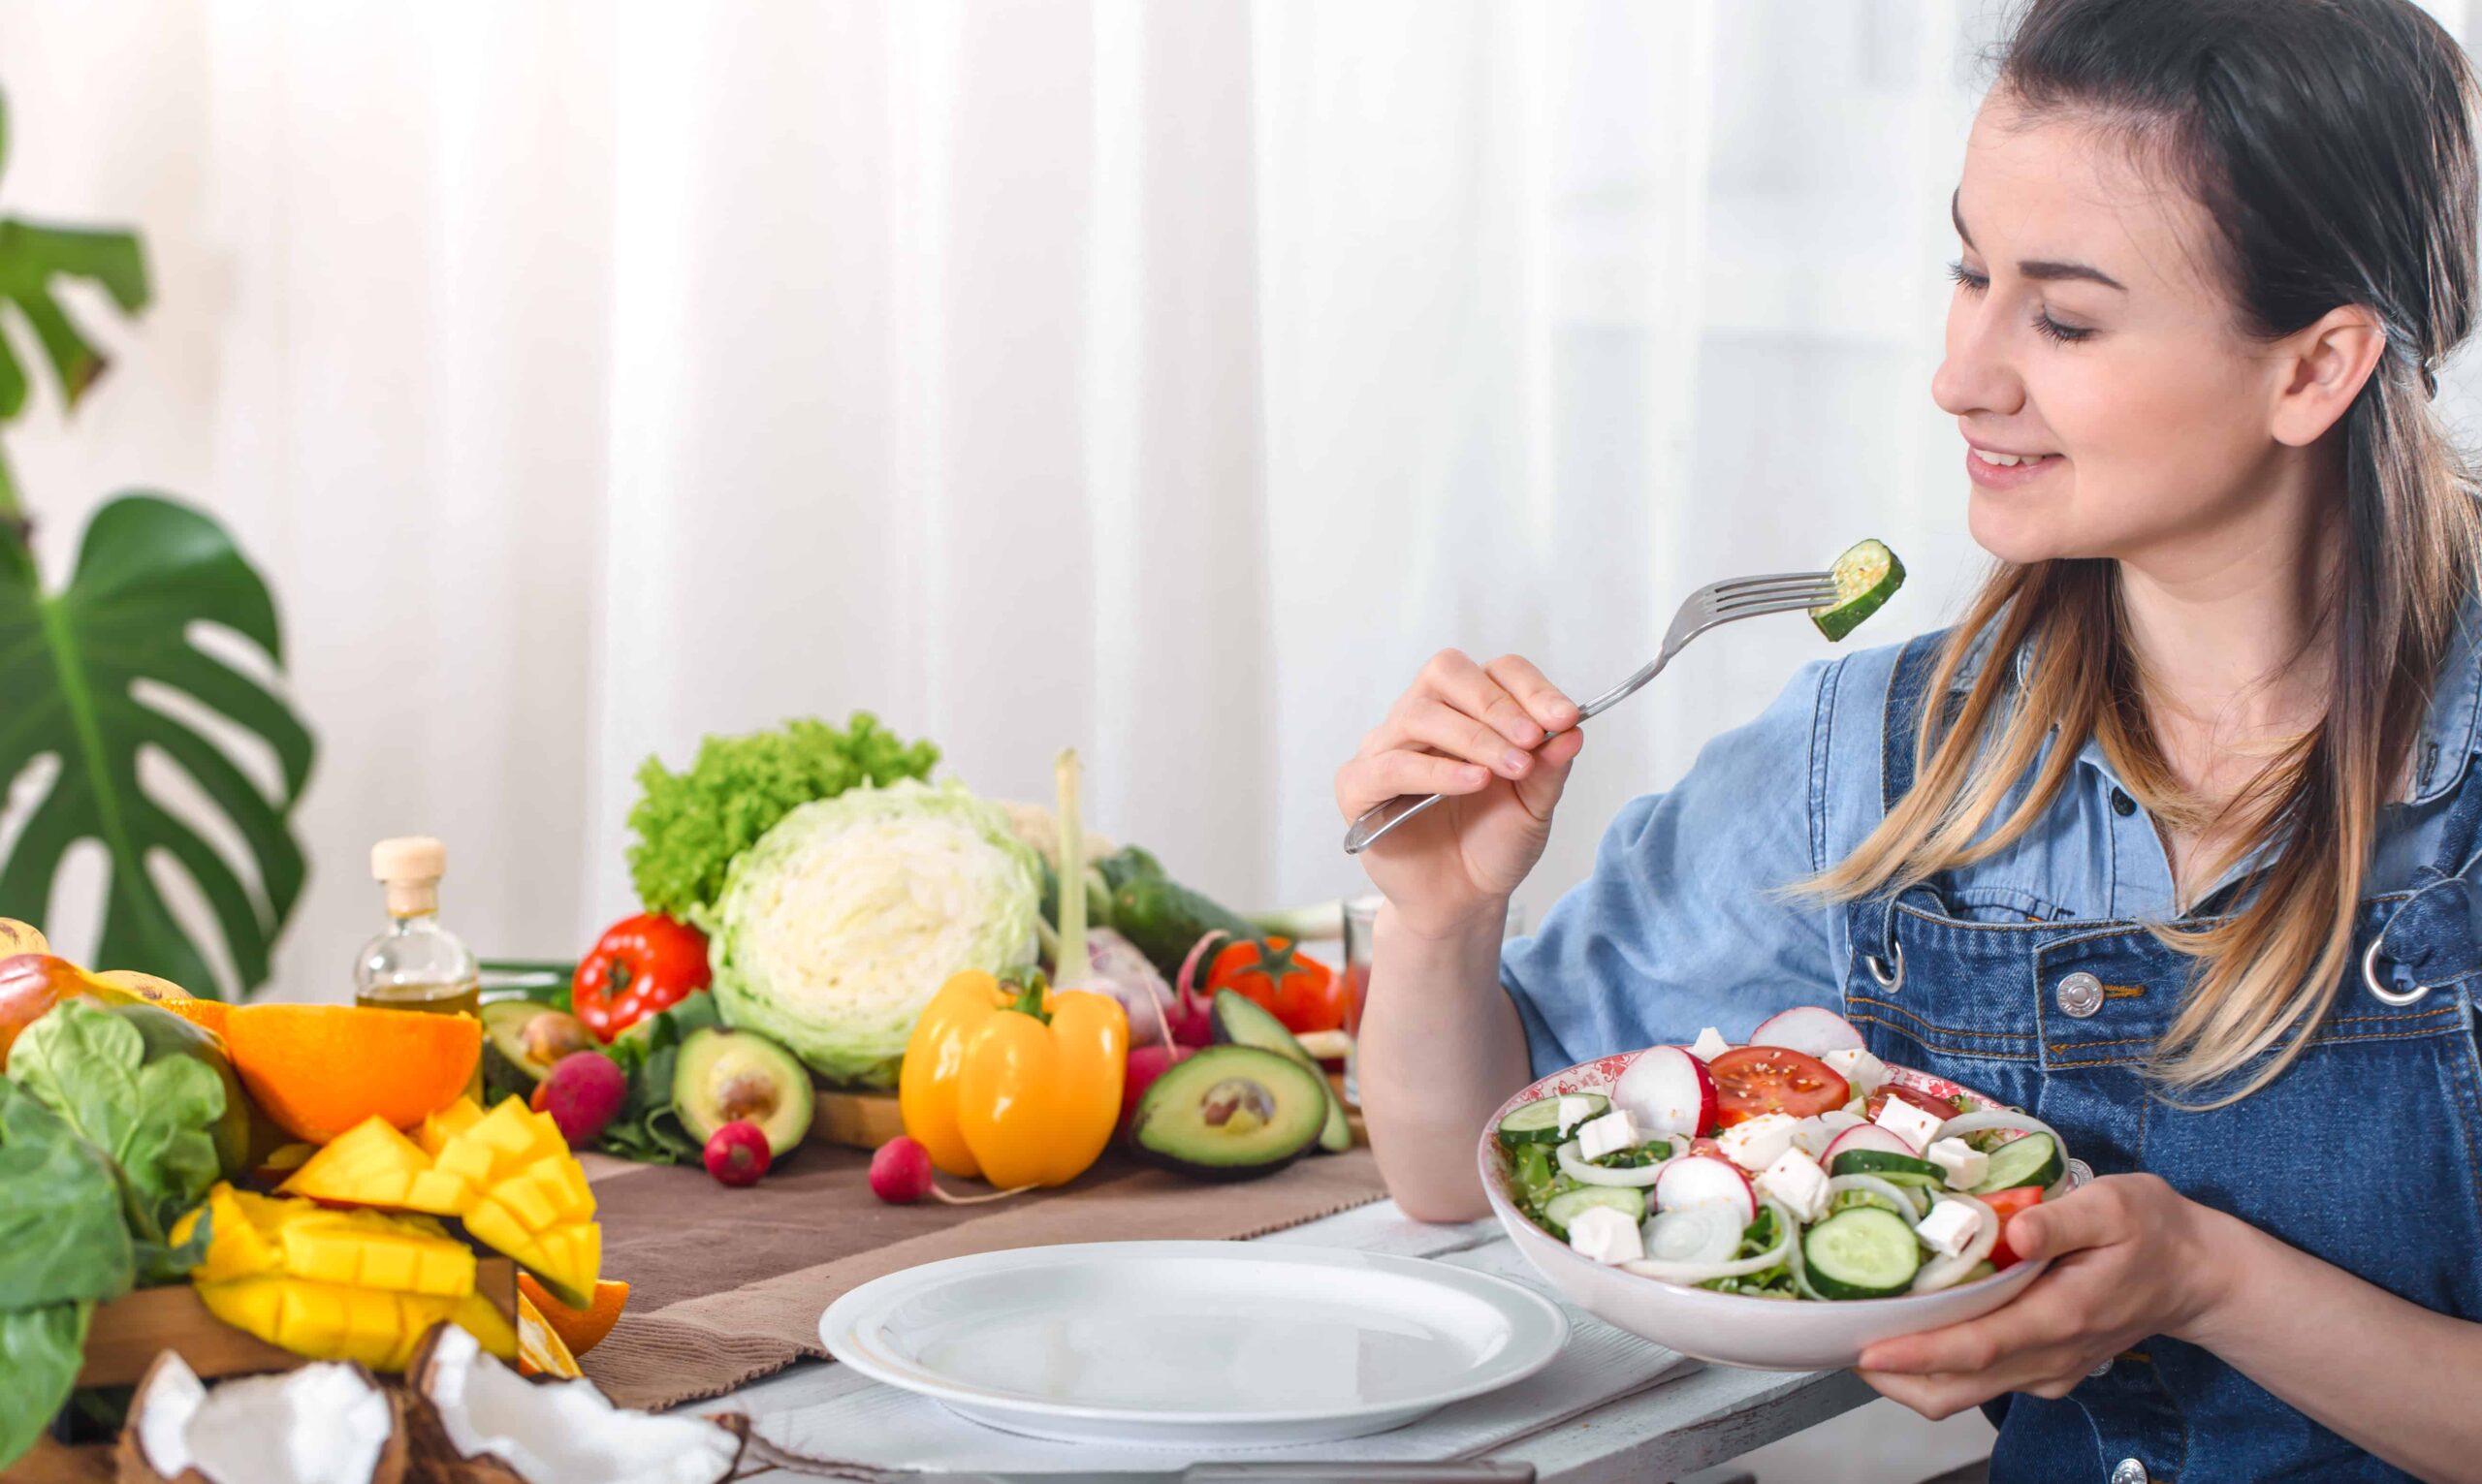 young-happy-woman-eating-salad-with-organic-vegetables-table-light-background-denim-clothes-concept-healthy-home-made-food